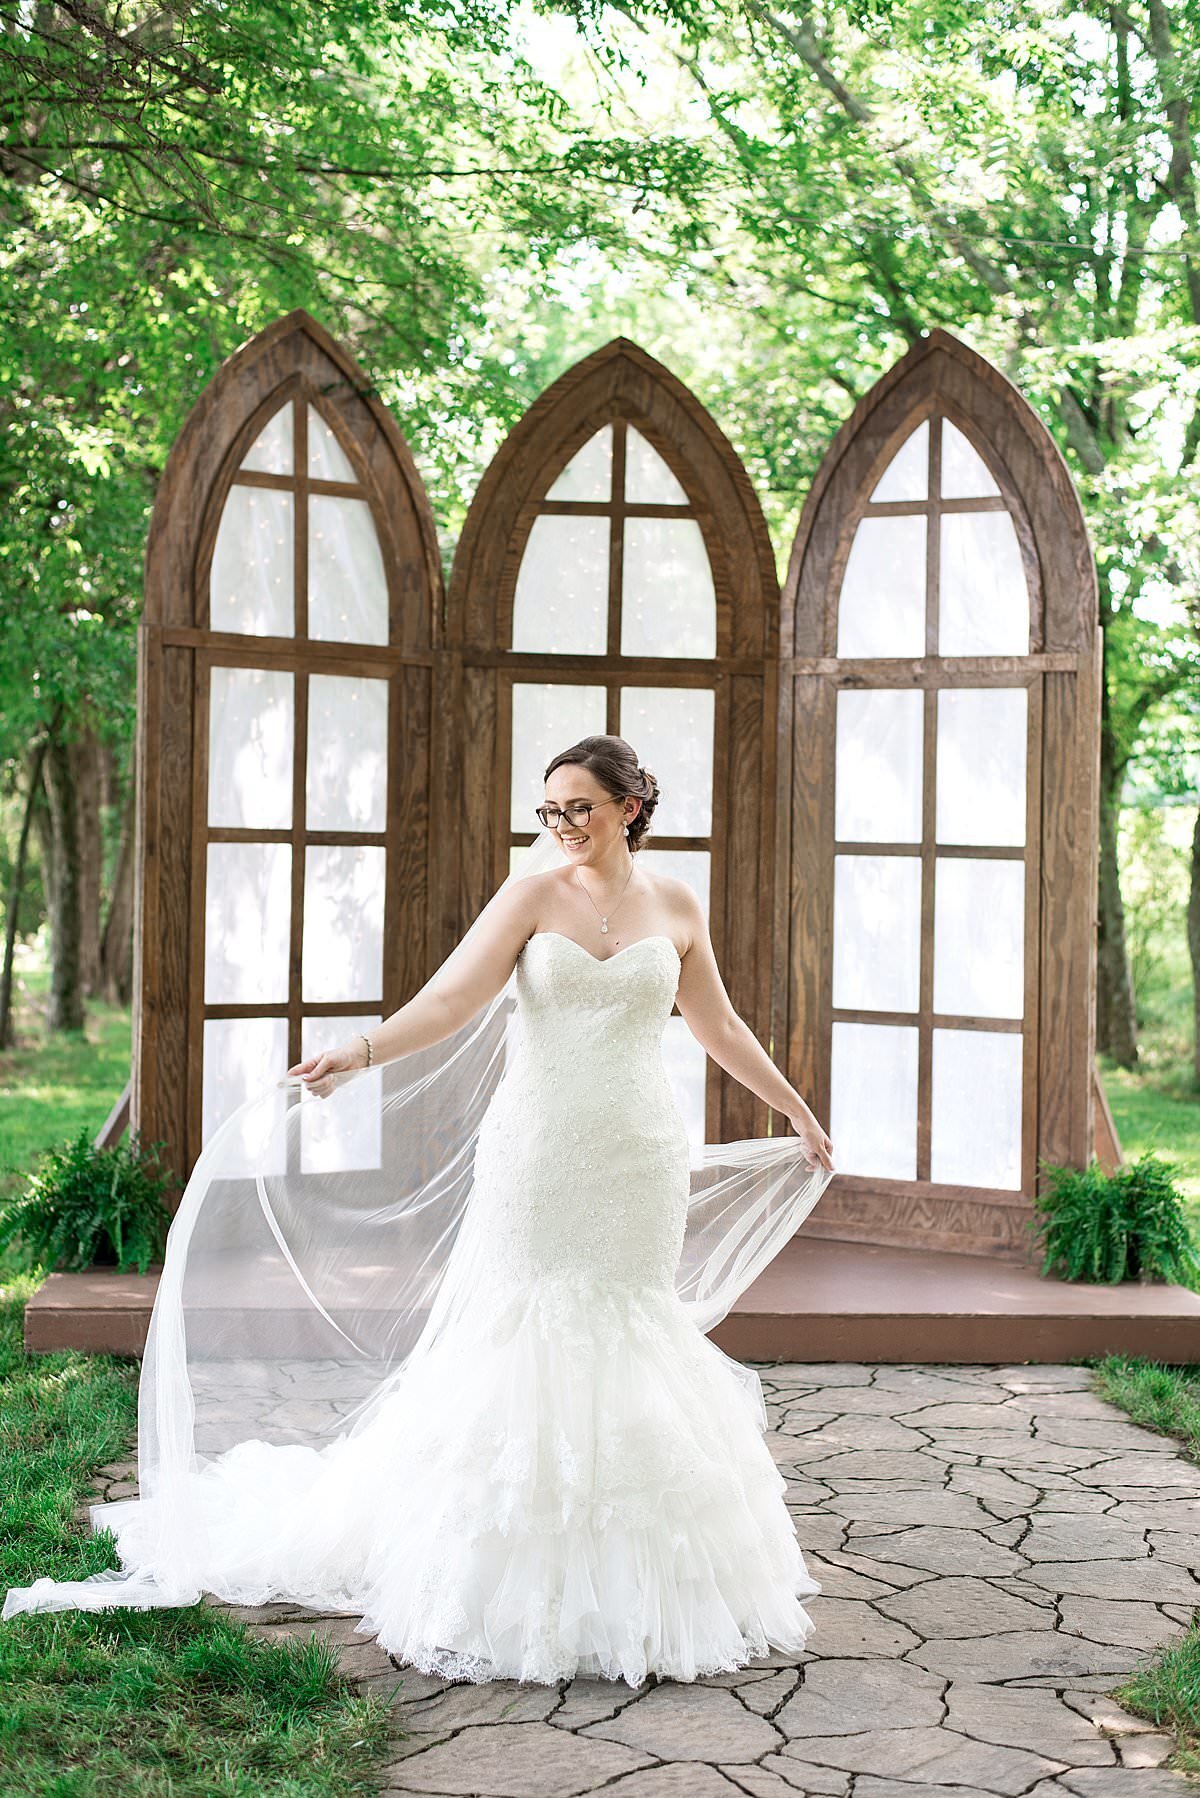 Bride wearing strapless sweetheart neckline dress with fit and flare frilly bottom and cathedral veil in front of large outdoor windows at Lovers Lane at Grace Valley Farm